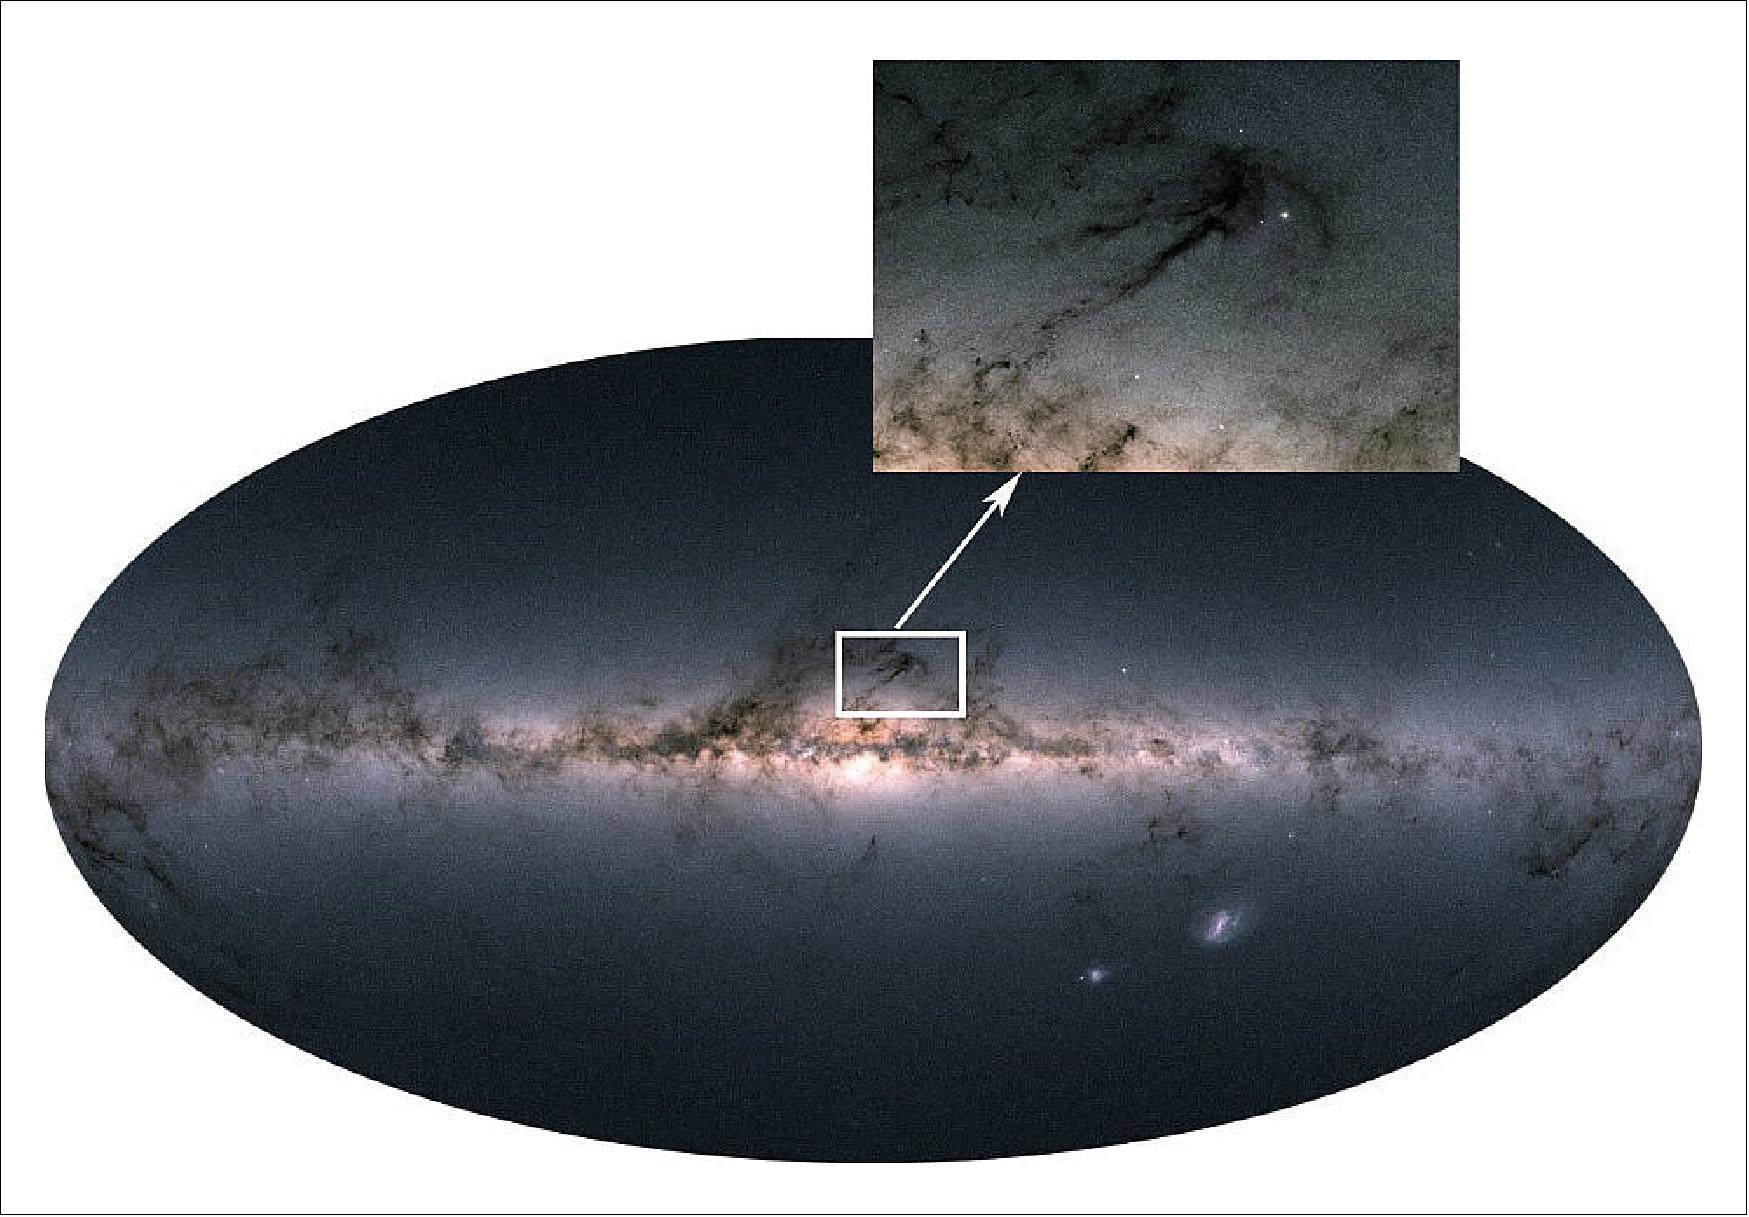 Figure 13: The region of the stellar formation Rho Ophiuchi observed by ESA Gaia satellite. The shining dots are stellar clusters with the massive and youngest stars of the region. The dark filaments track the gas and dust distribution, where the new stars are born. This is not a conventional photographic image but the result of the integration of all the received radiation by the satellite during the 22 months of continuous measurements through different filters on the spacecraft (image credit: ESA/Gaia/DPAC, CC BY-SA 3.0 IGO)